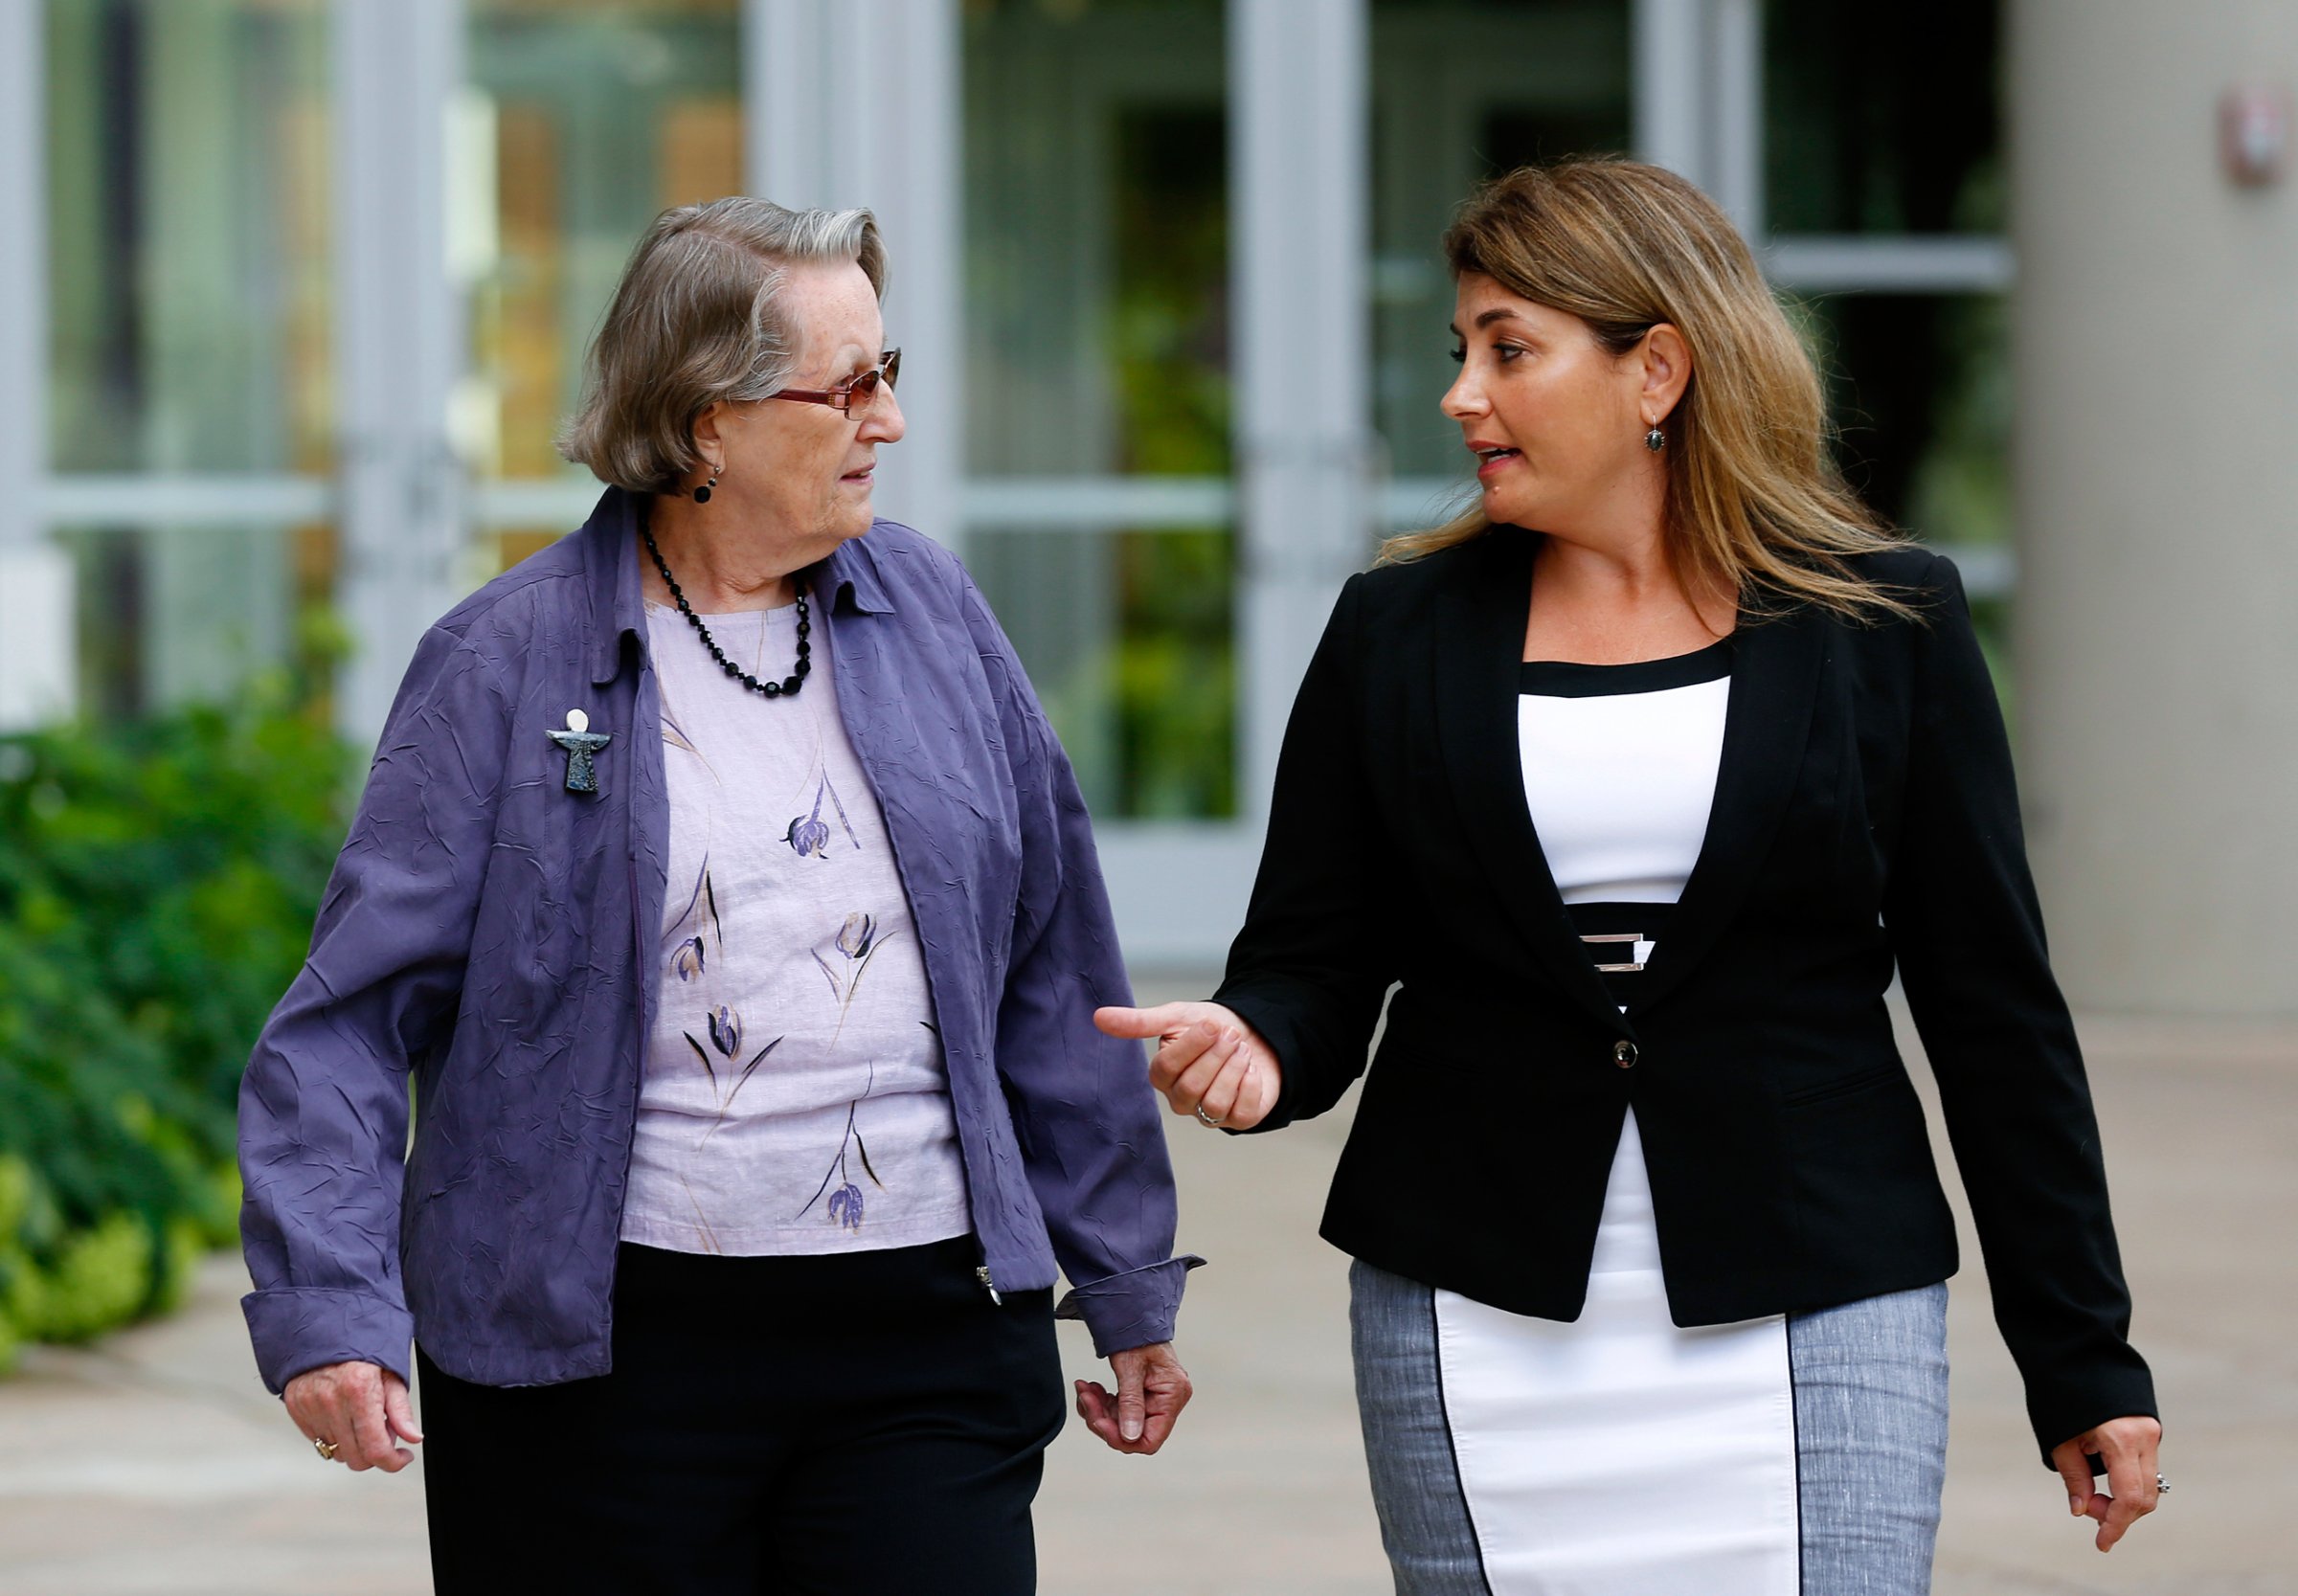 CORRECTS IDENTIFICATION - In this Aug. 11, 2016 photo, Angela McArthur, right, director of the Anatomy Bequest Program at the University of Minnesota Medical School, walks with Jean Larson, widow of a donor in Minneapolis. Once a relatively rare option, body donation has surged at medical schools, including the University of Minnesota. The increase has helped provide cadavers for dissection by first-year medical students, and for research and surgical training. (AP Photo/Andy Clayton-King)